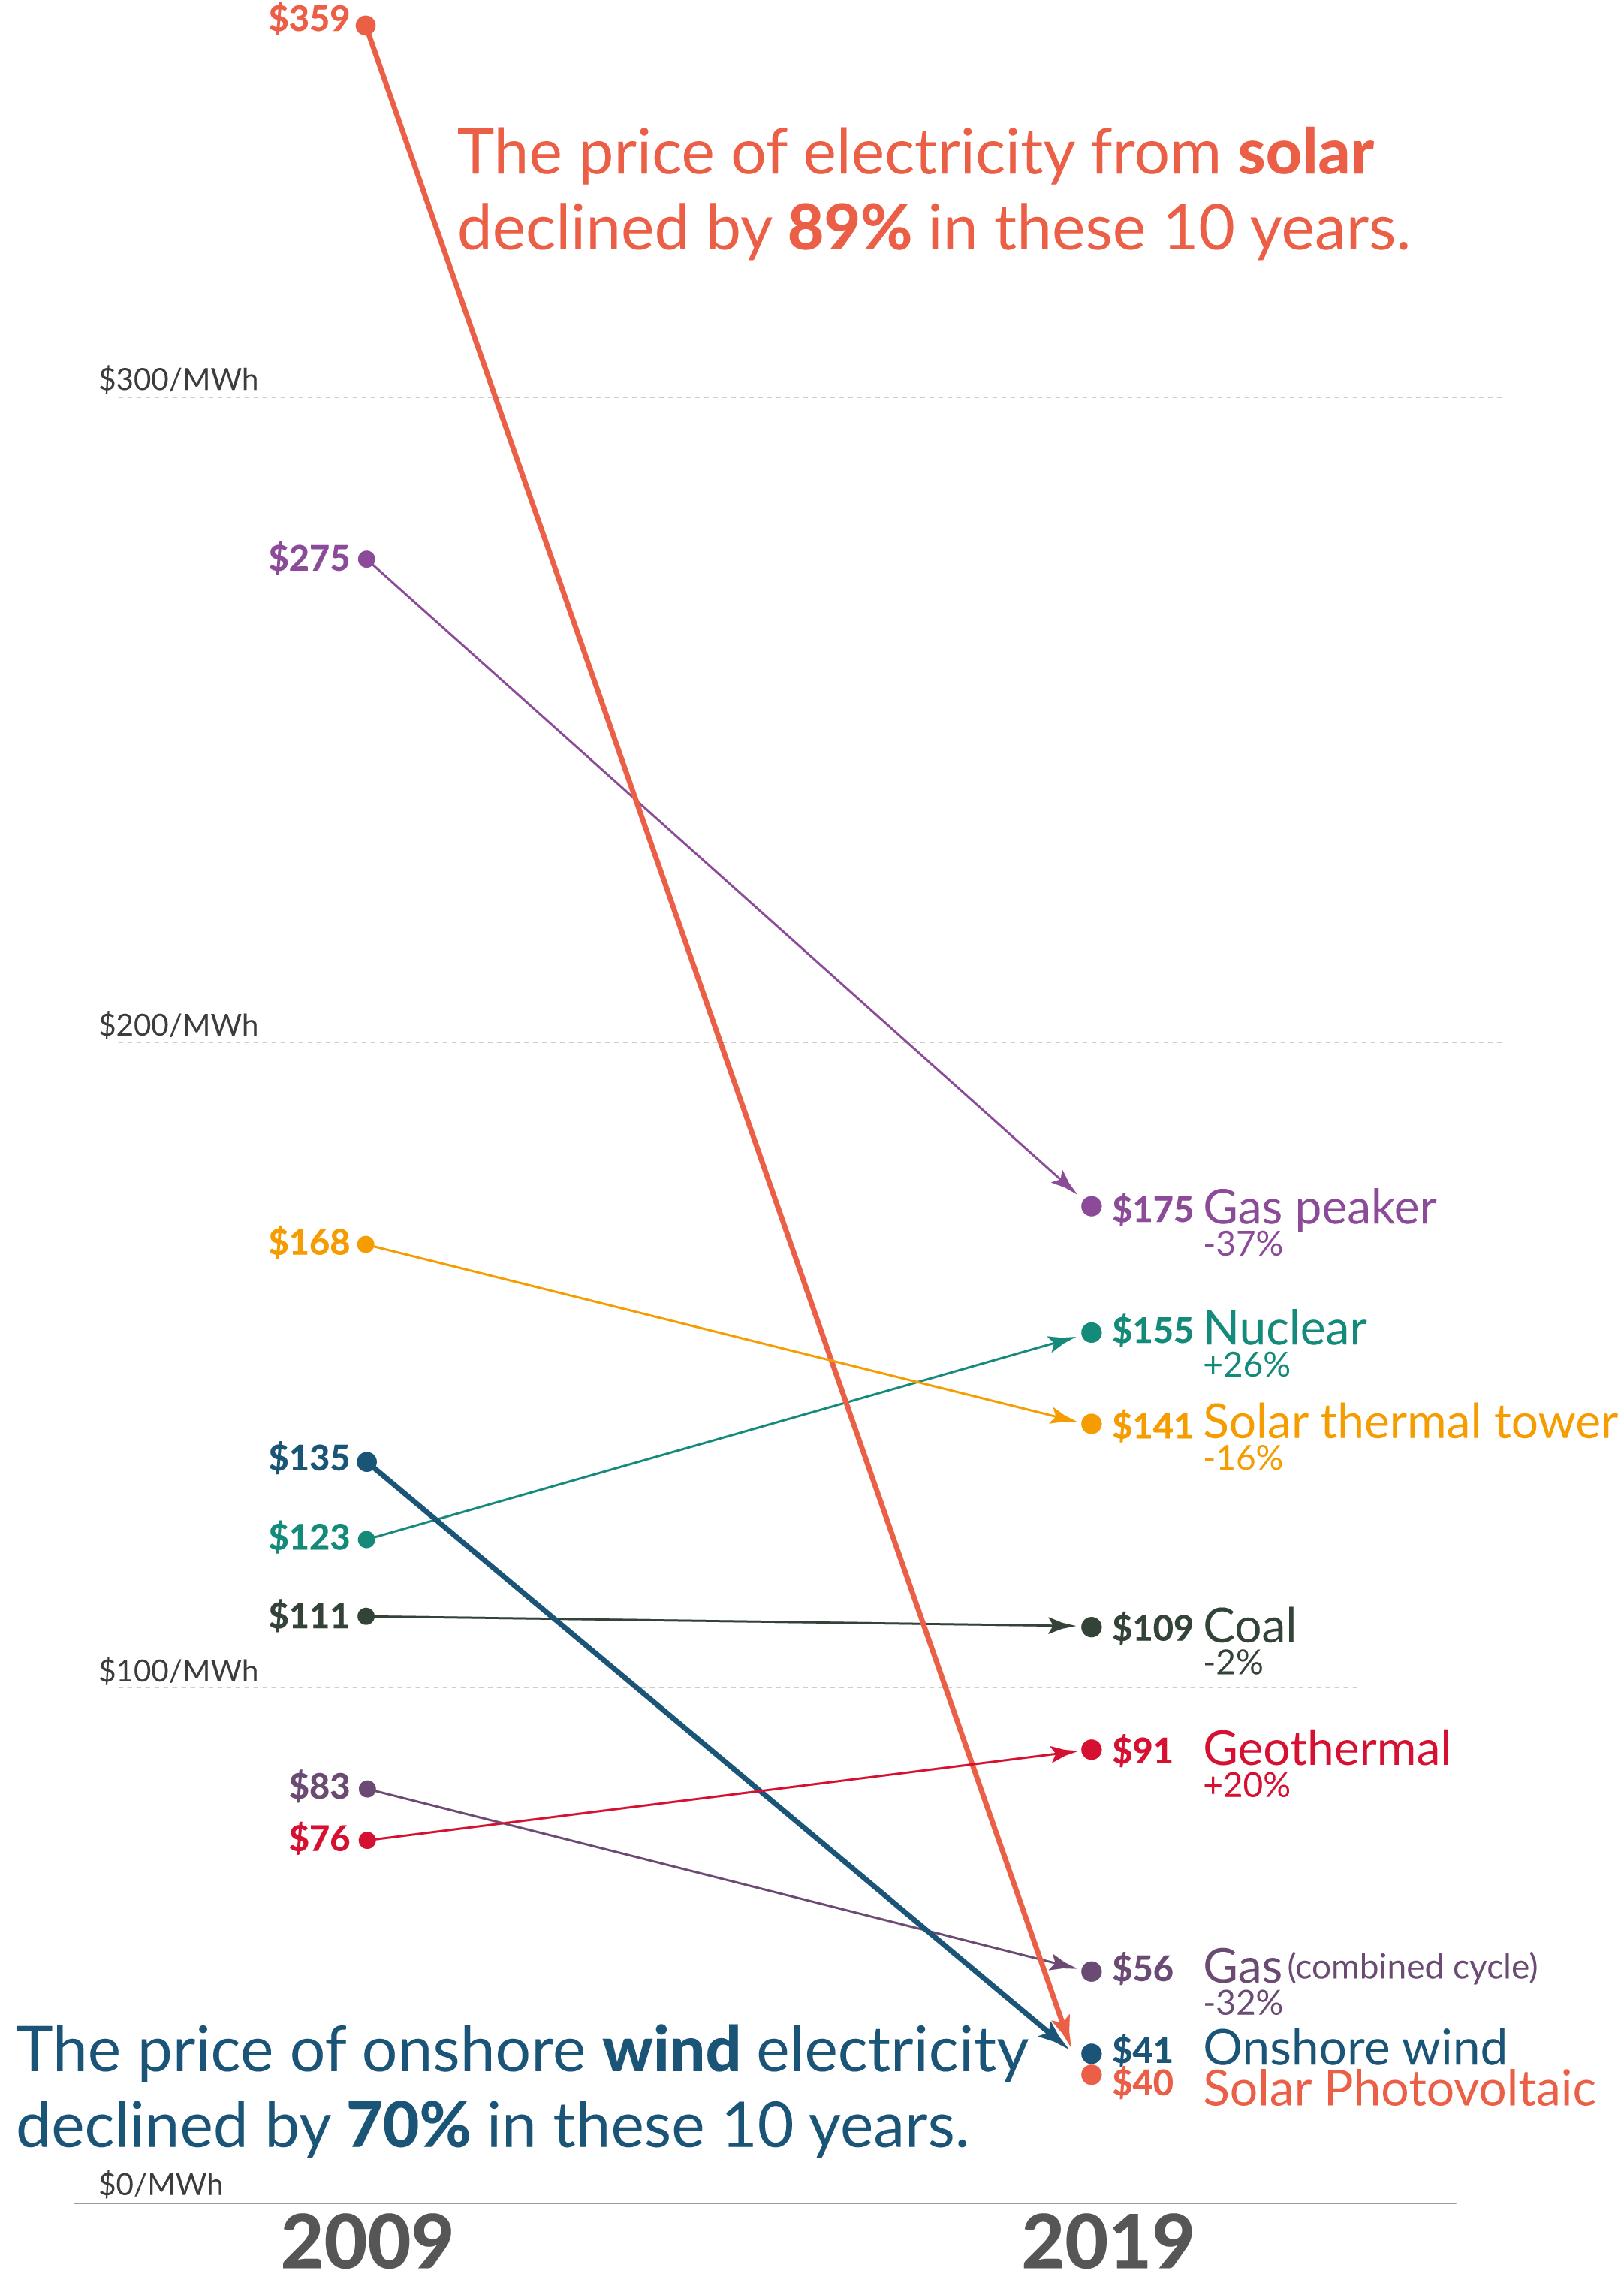 Price of Electricity 2009/2019